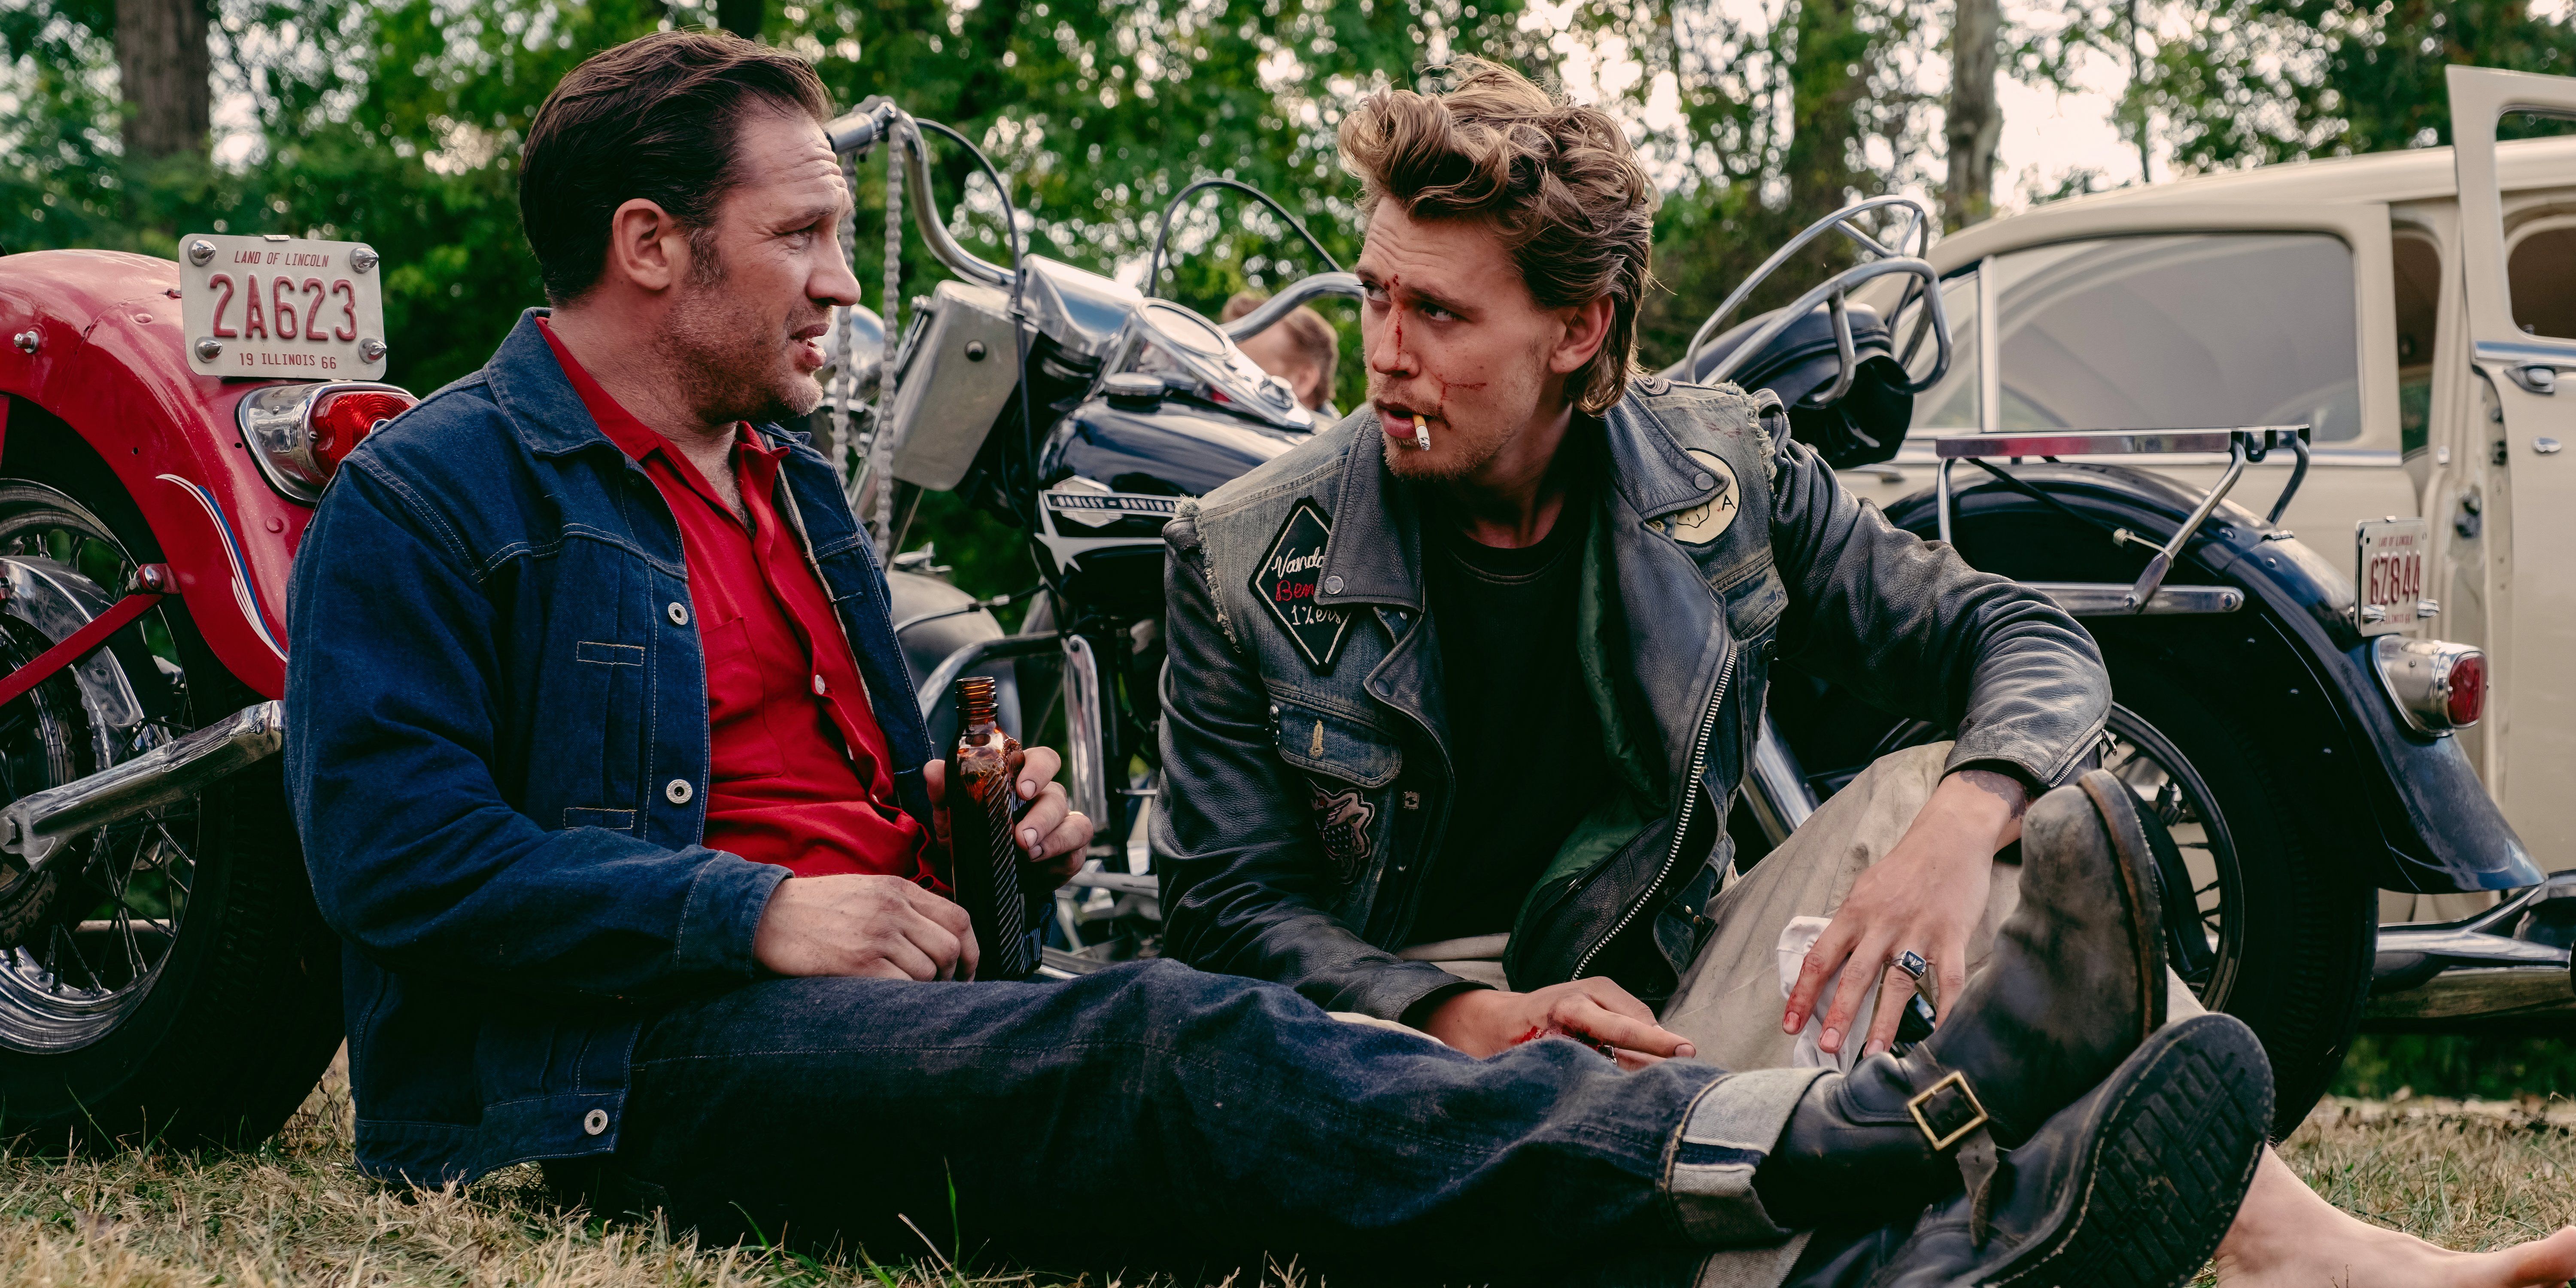 Johnny and Benny sit together talking on the grass in The Bikeriders movie still